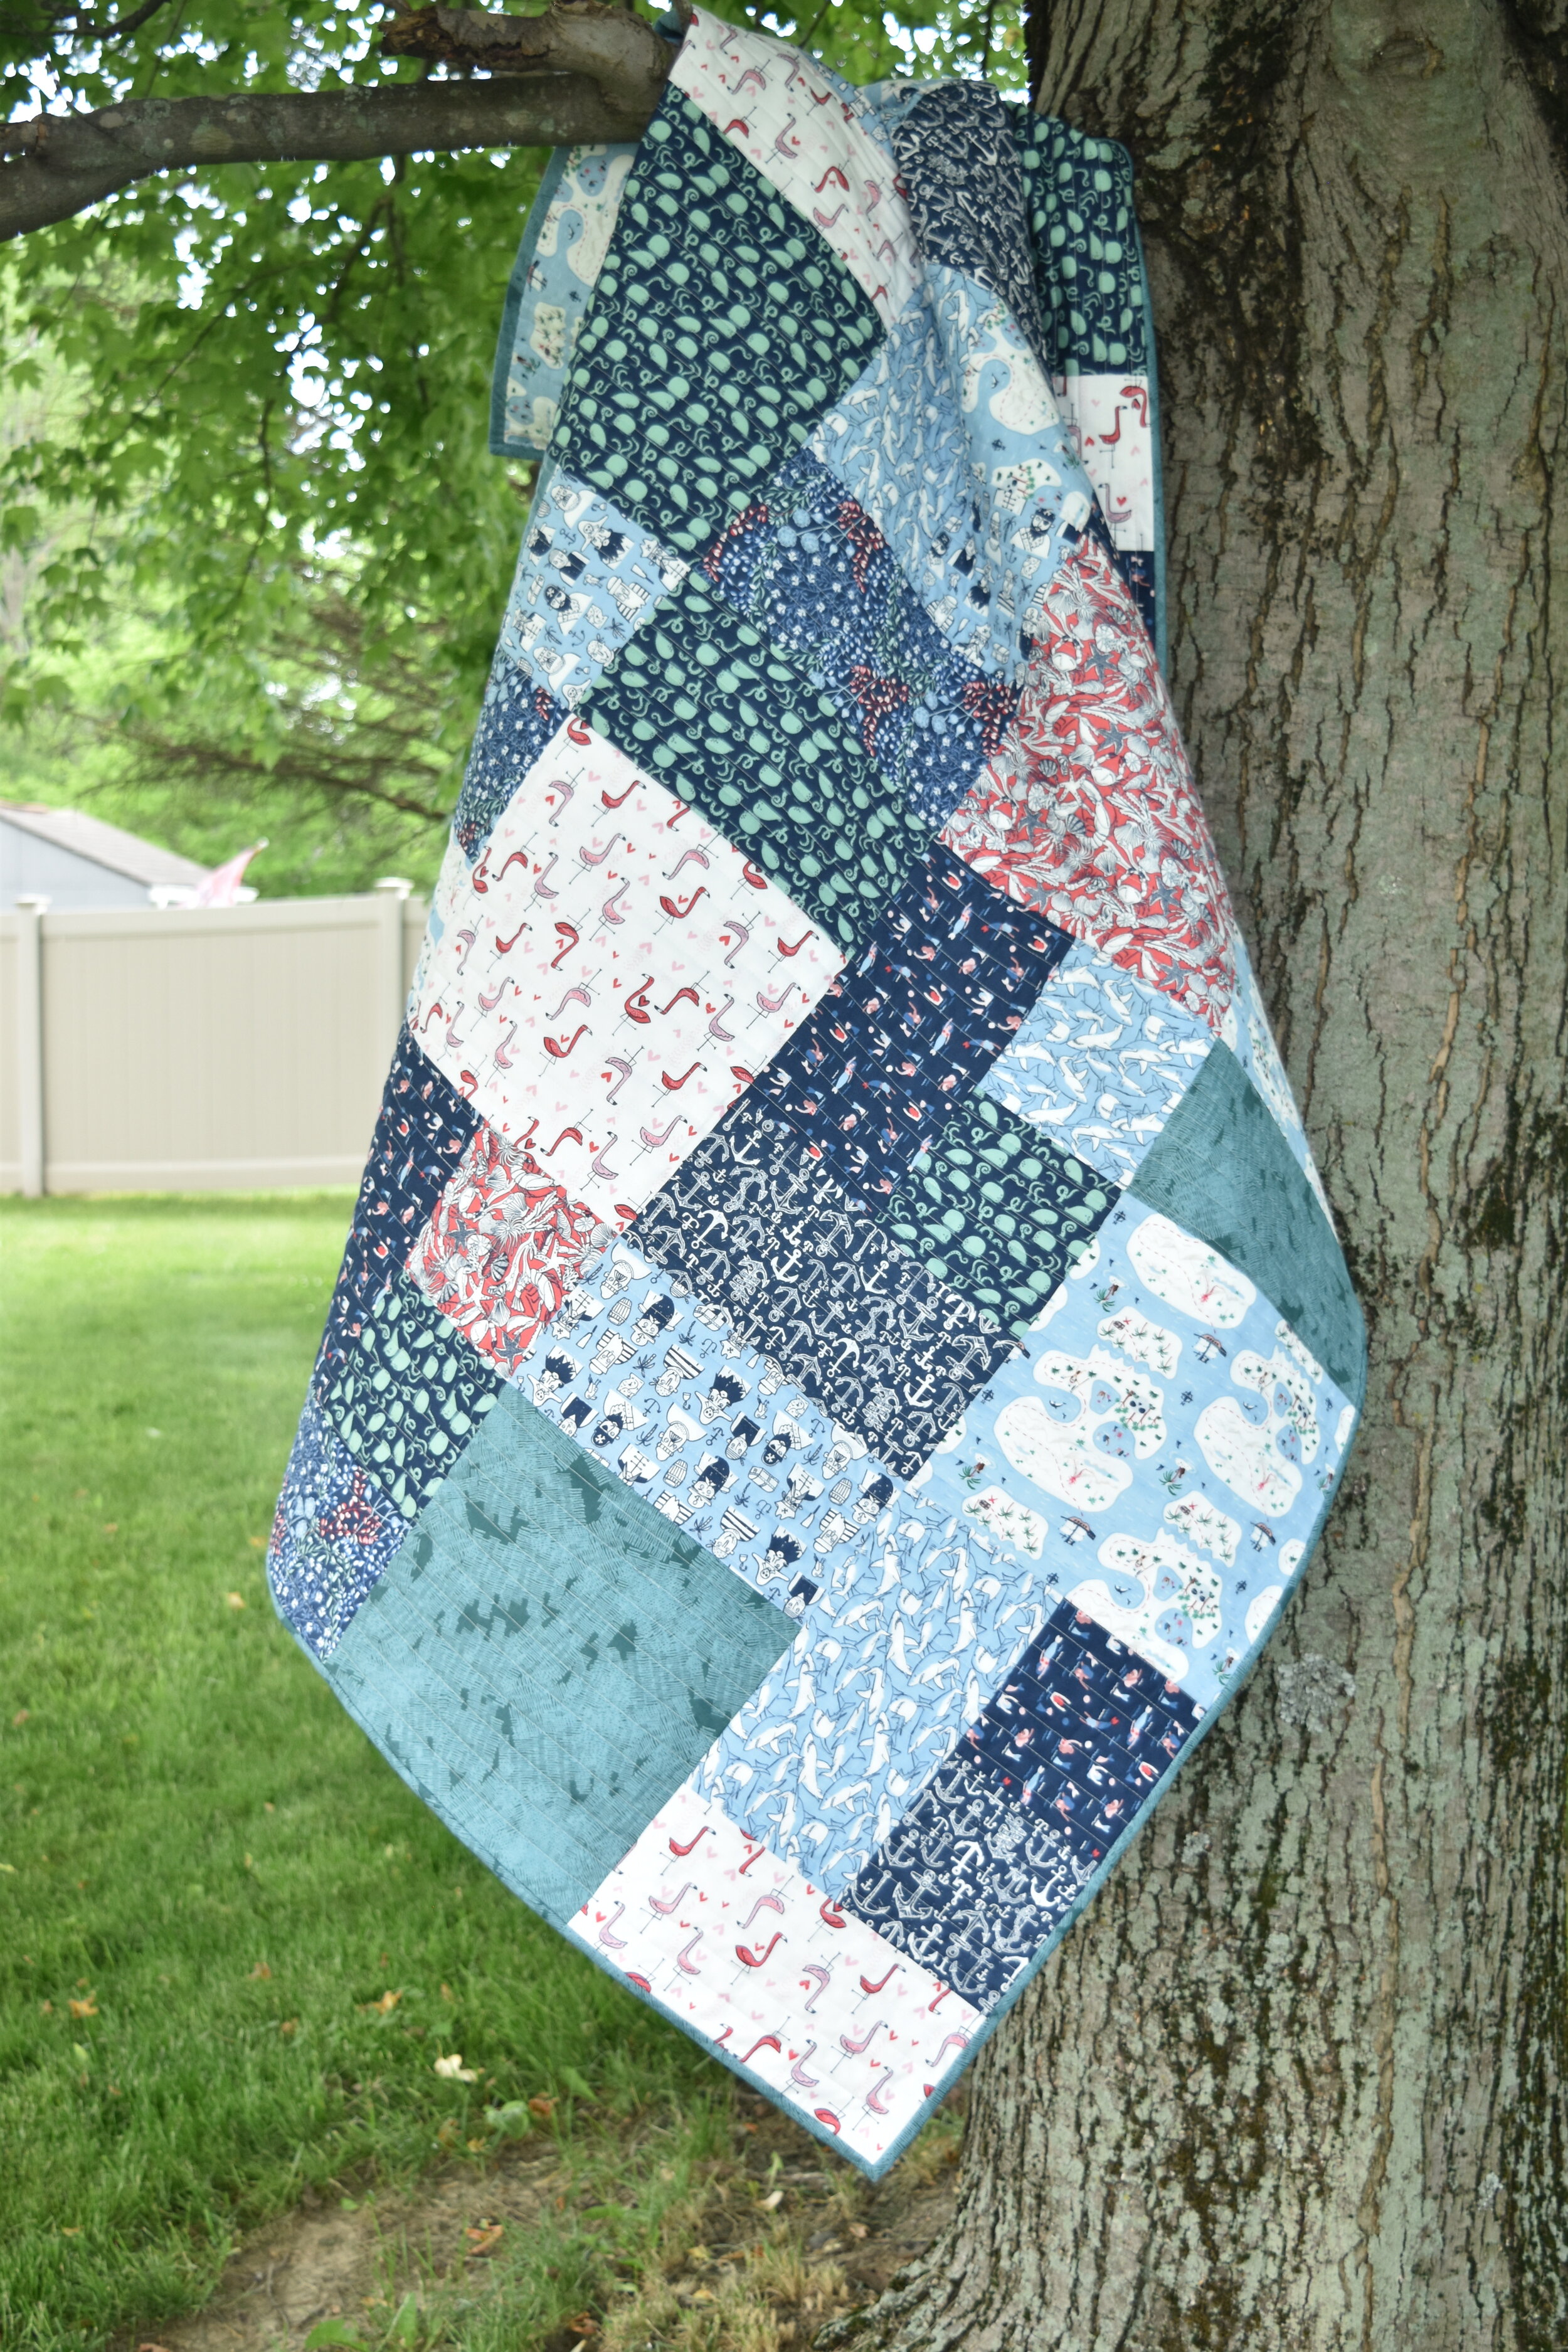 How Many Quilt Squares In A Fat Quarter?